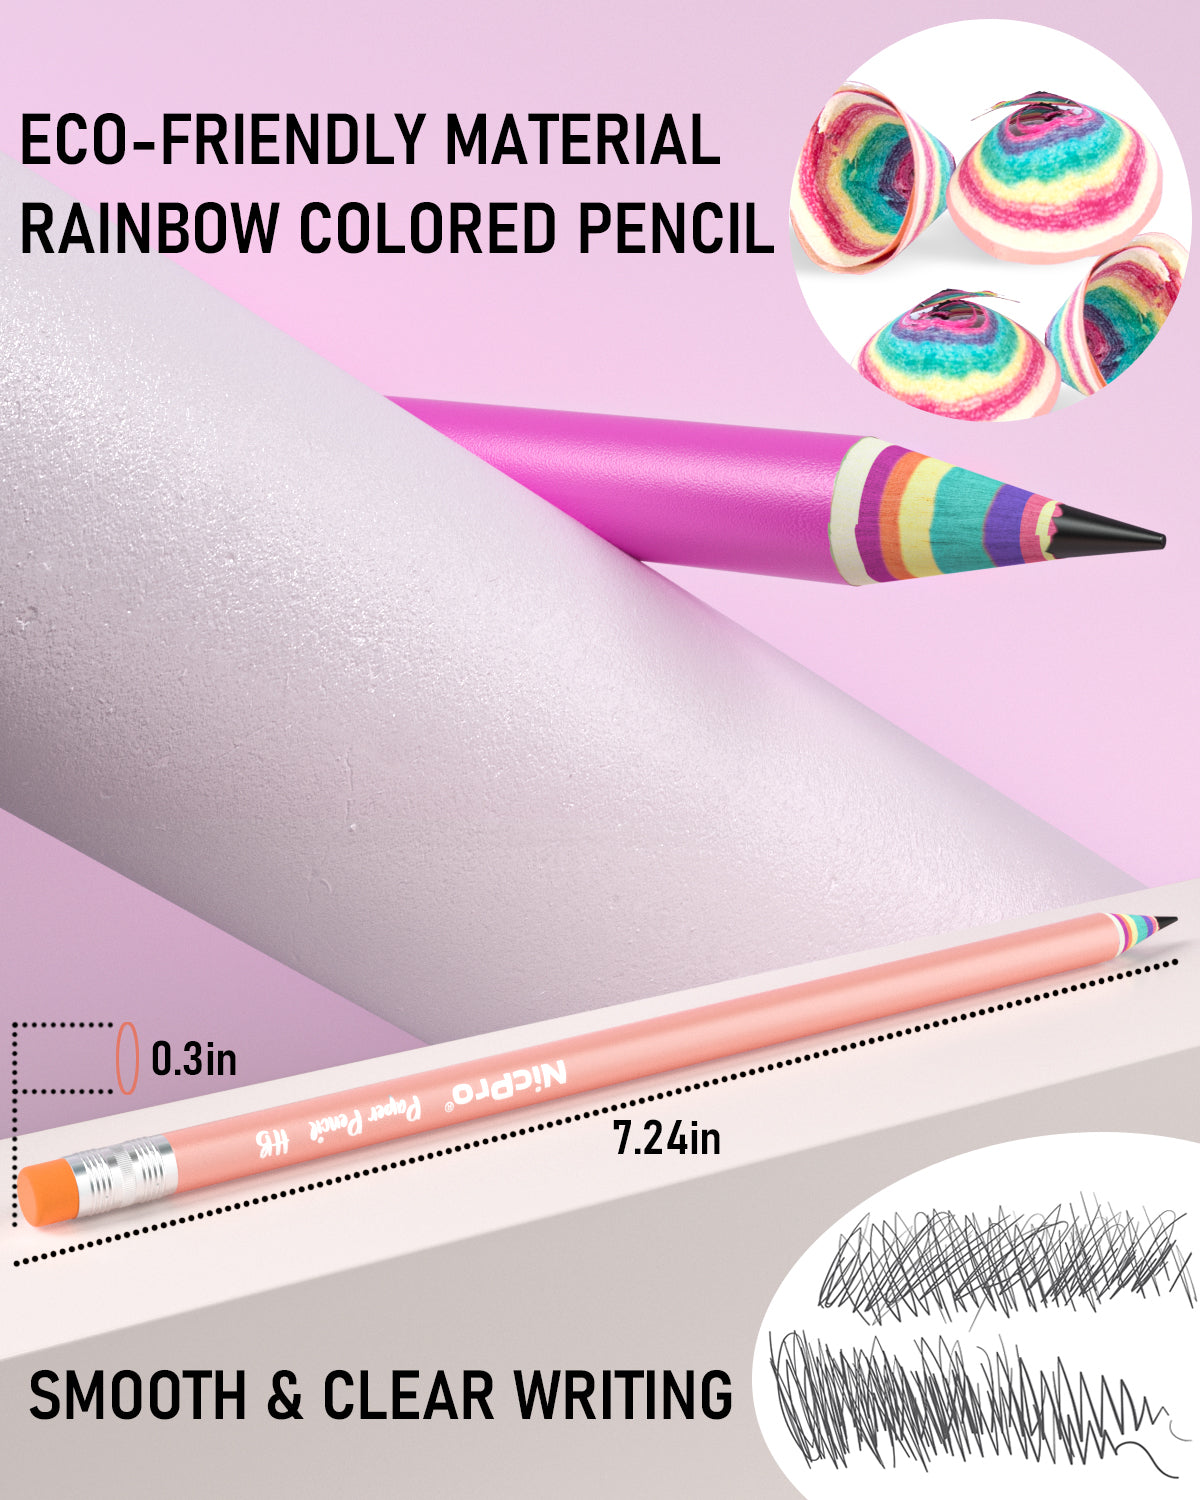 12pcs Rainbow Pencils, Colored Pencils for Adults, Multicolored